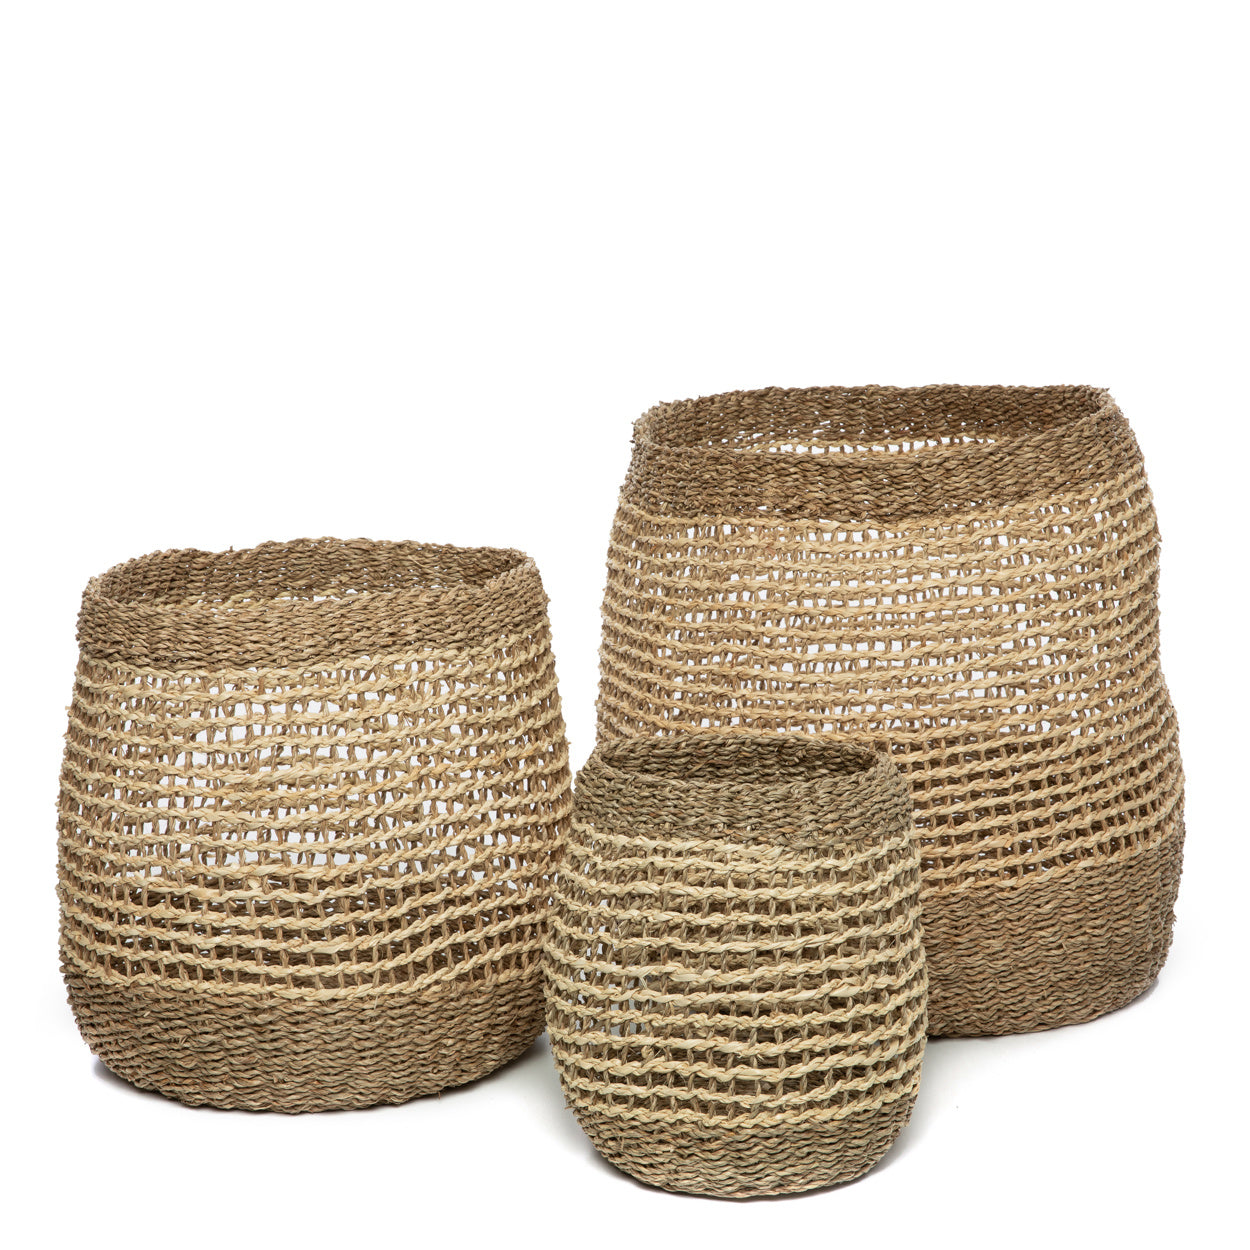 THE TAM HAI Baskets Set of 3 FRONT VIEW